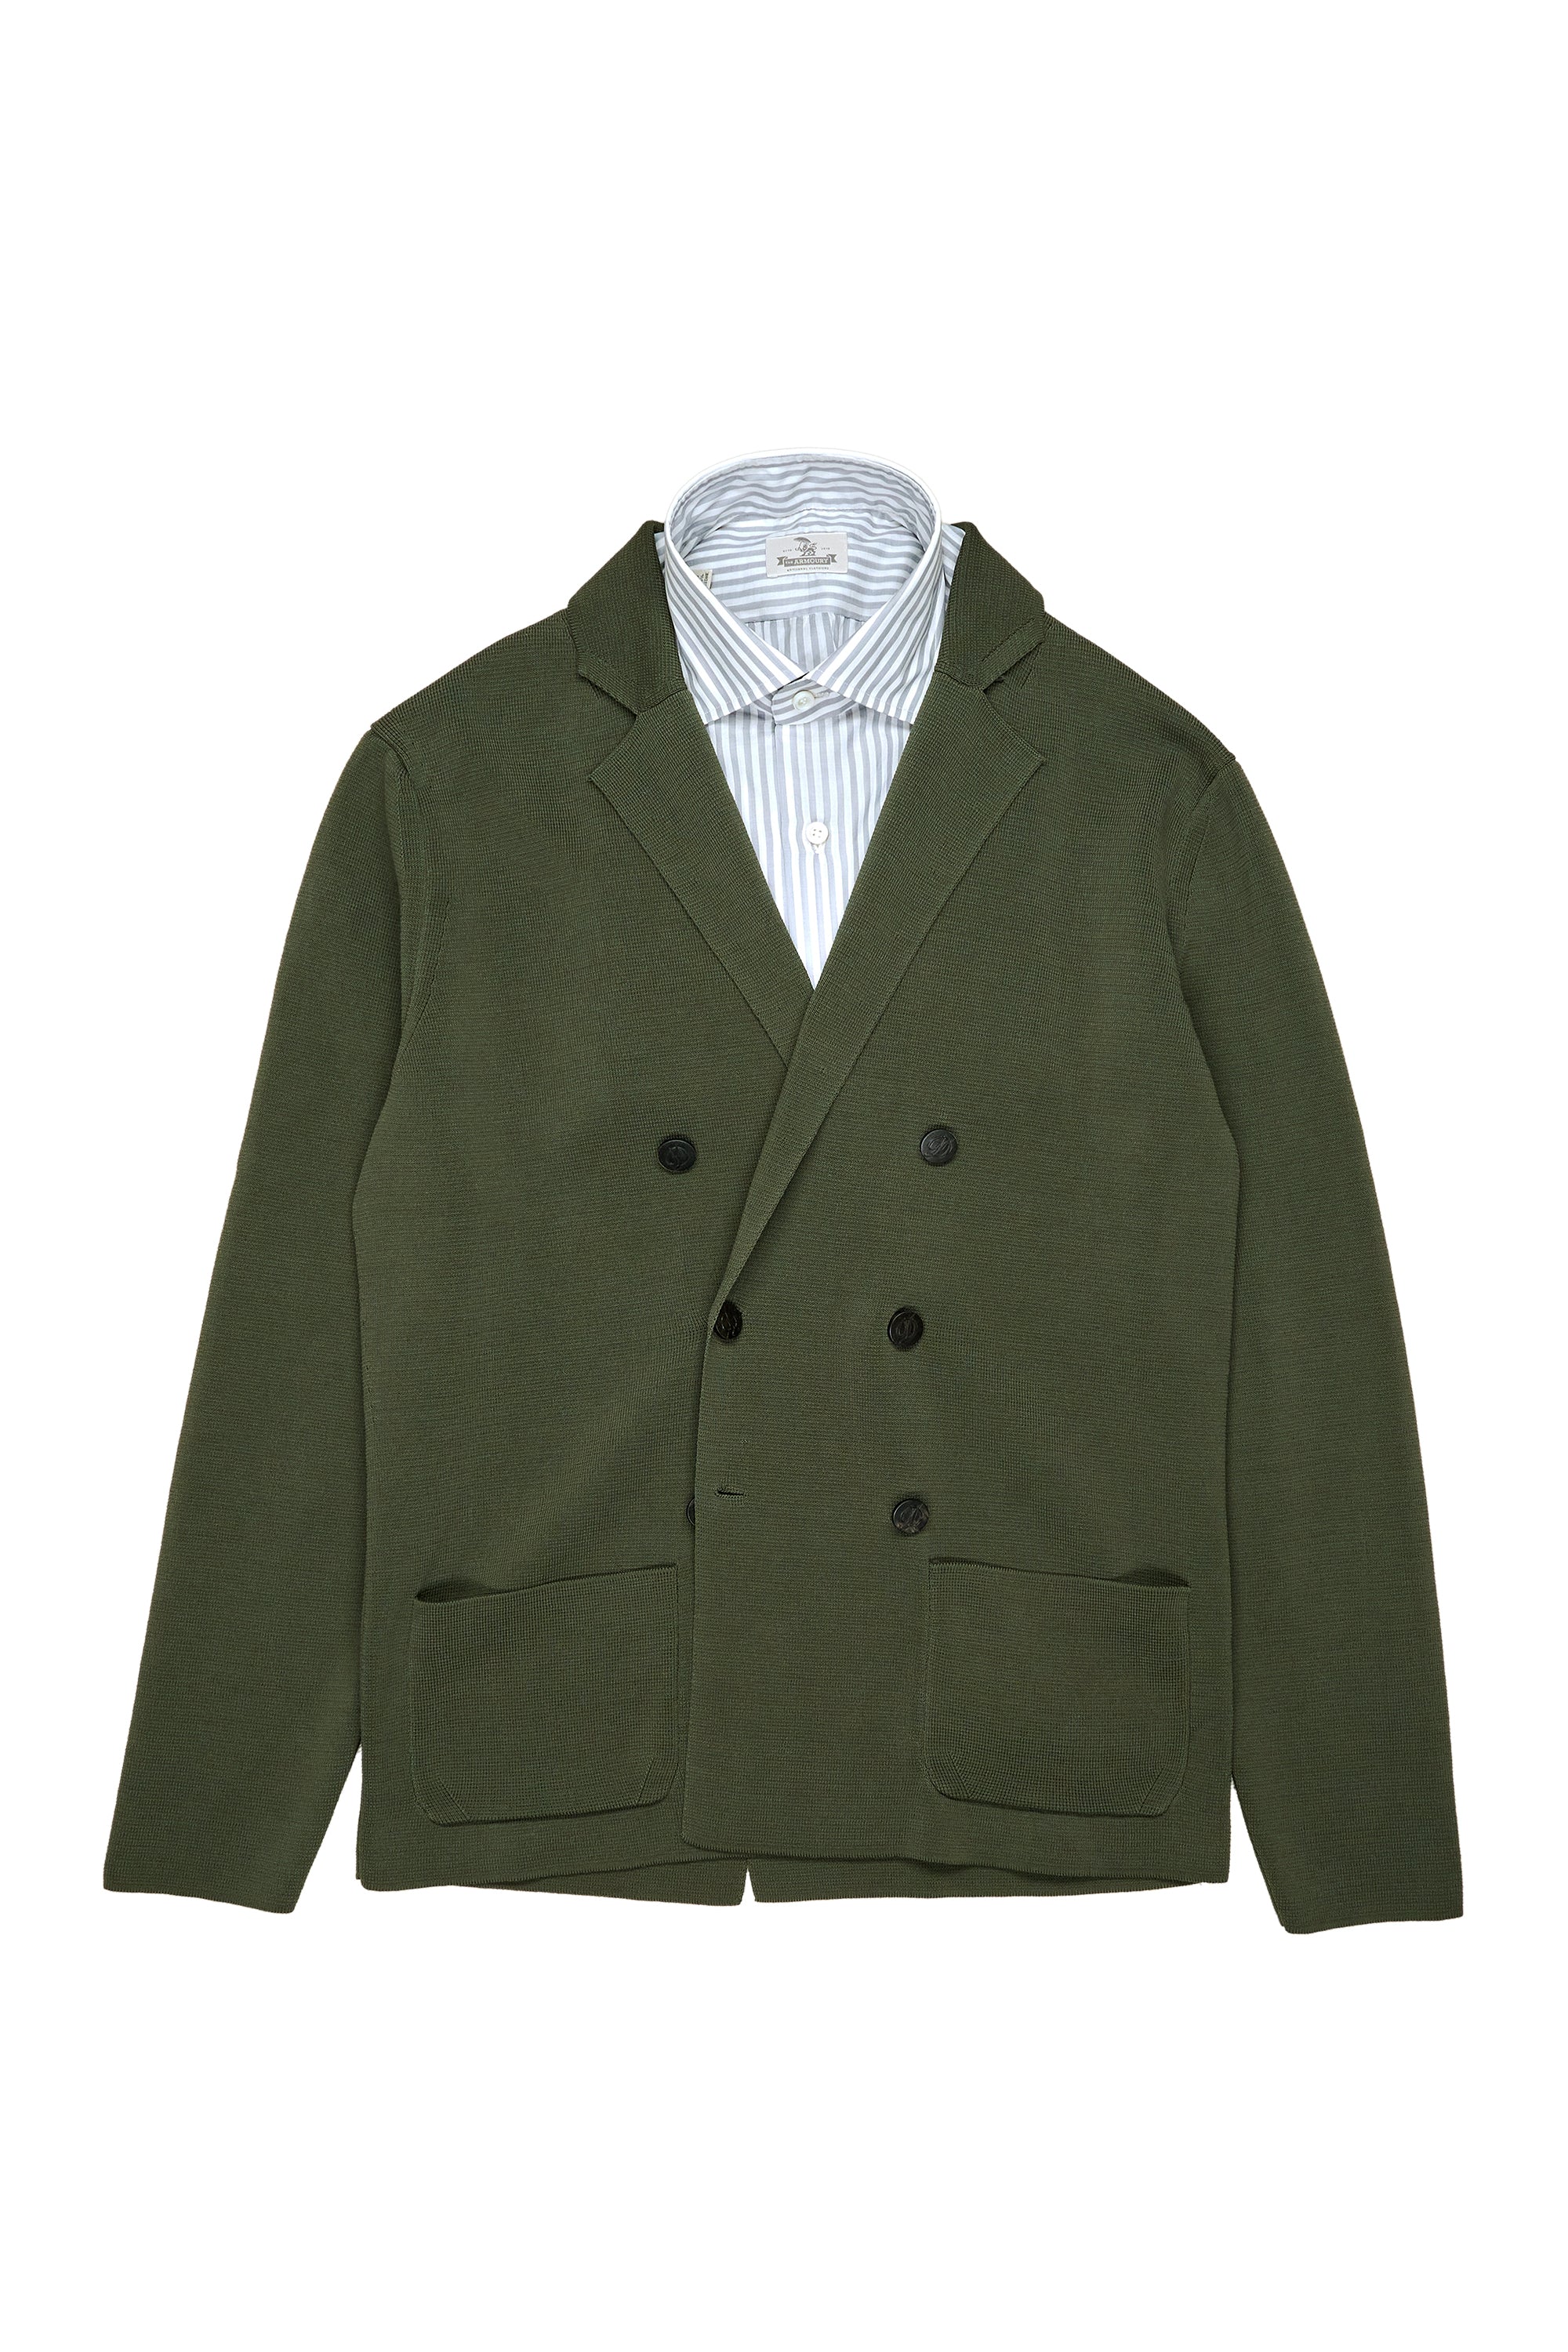 Drumohr Olive Cotton Knitted Double Breasted Jacket